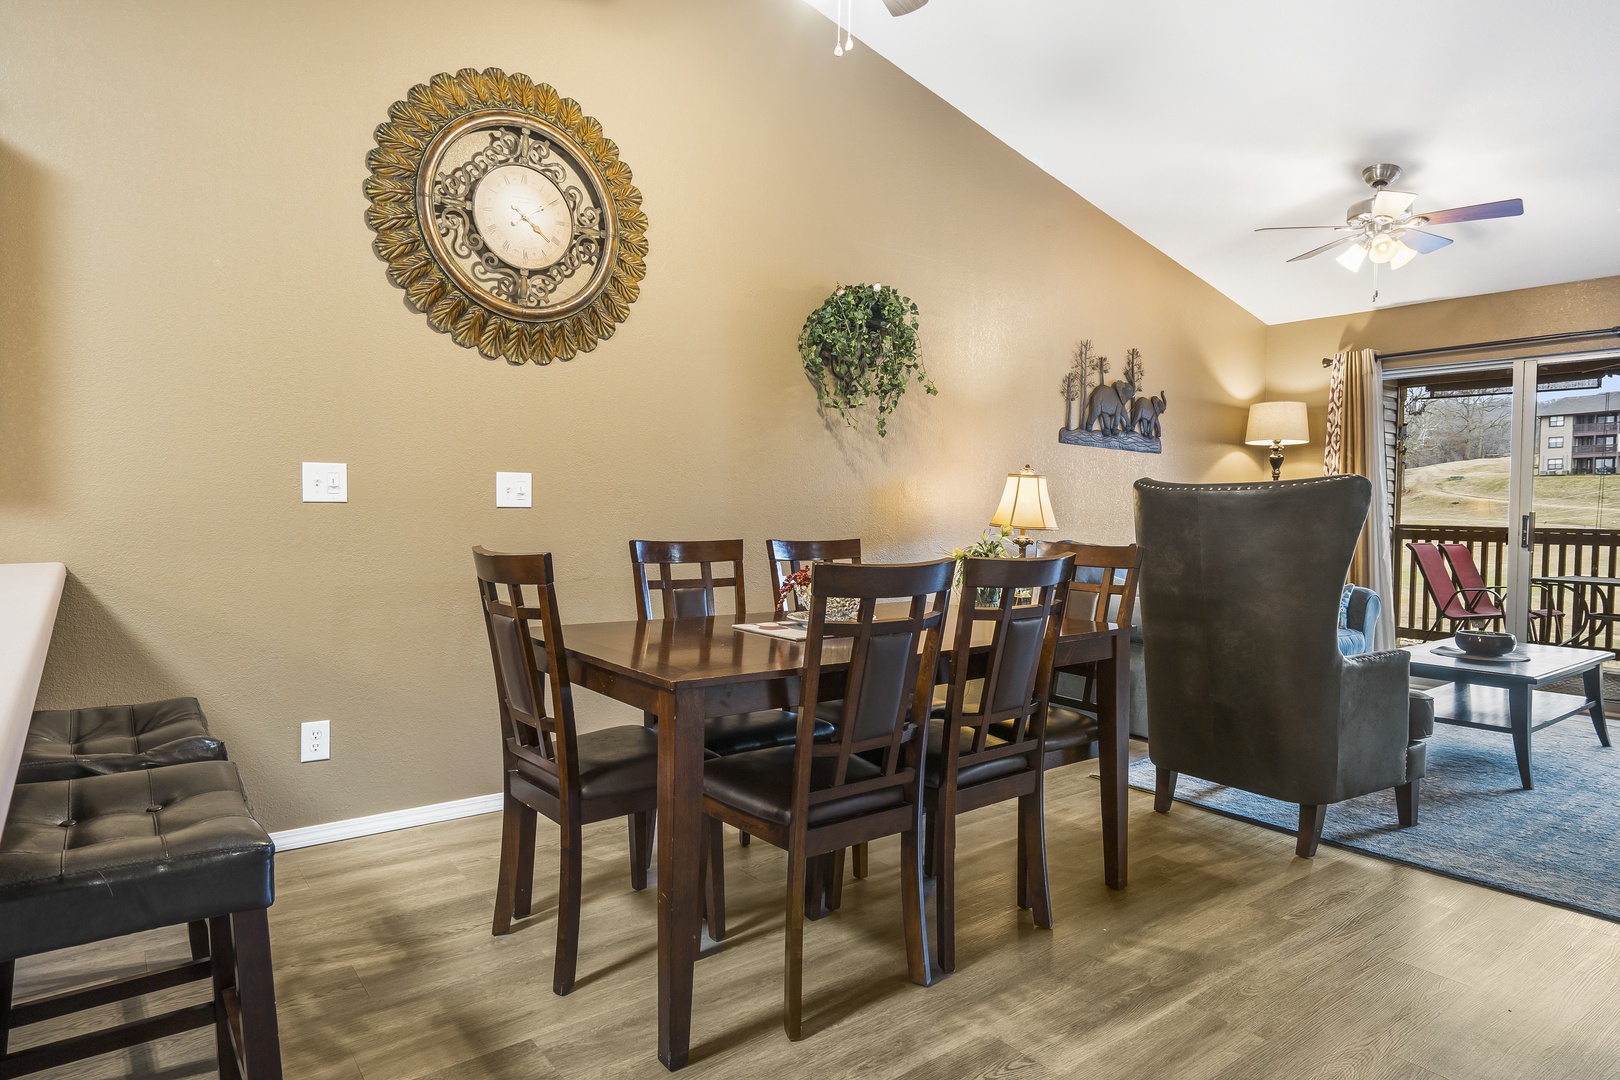 Gather for meals together at the dining table, with seating for 6